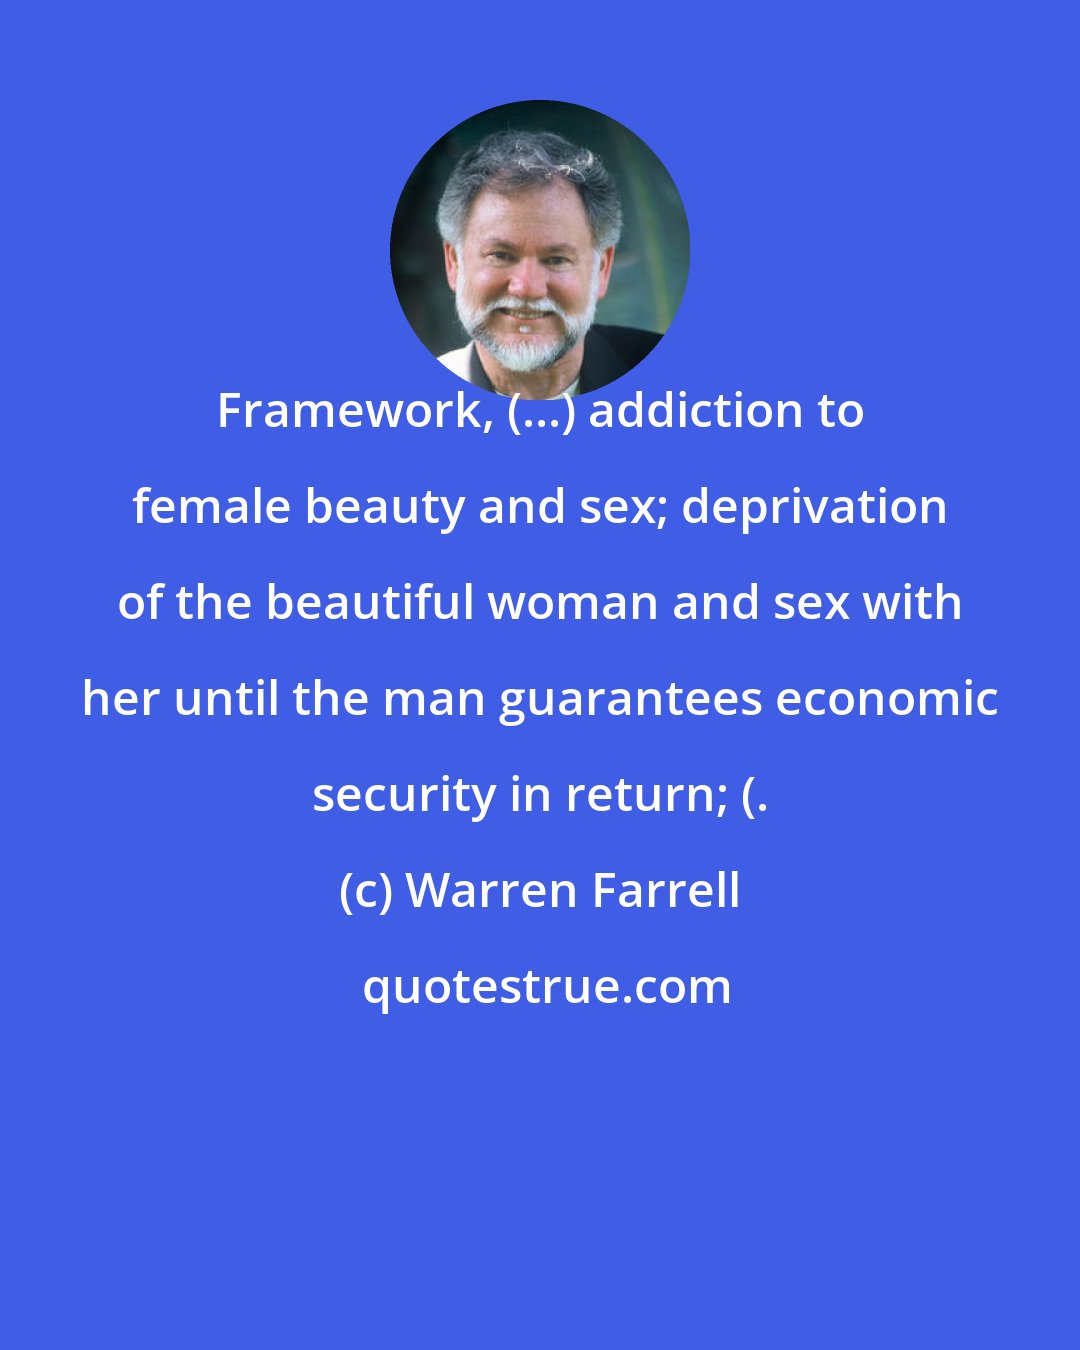 Warren Farrell: Framework, (...) addiction to female beauty and sex; deprivation of the beautiful woman and sex with her until the man guarantees economic security in return; (.